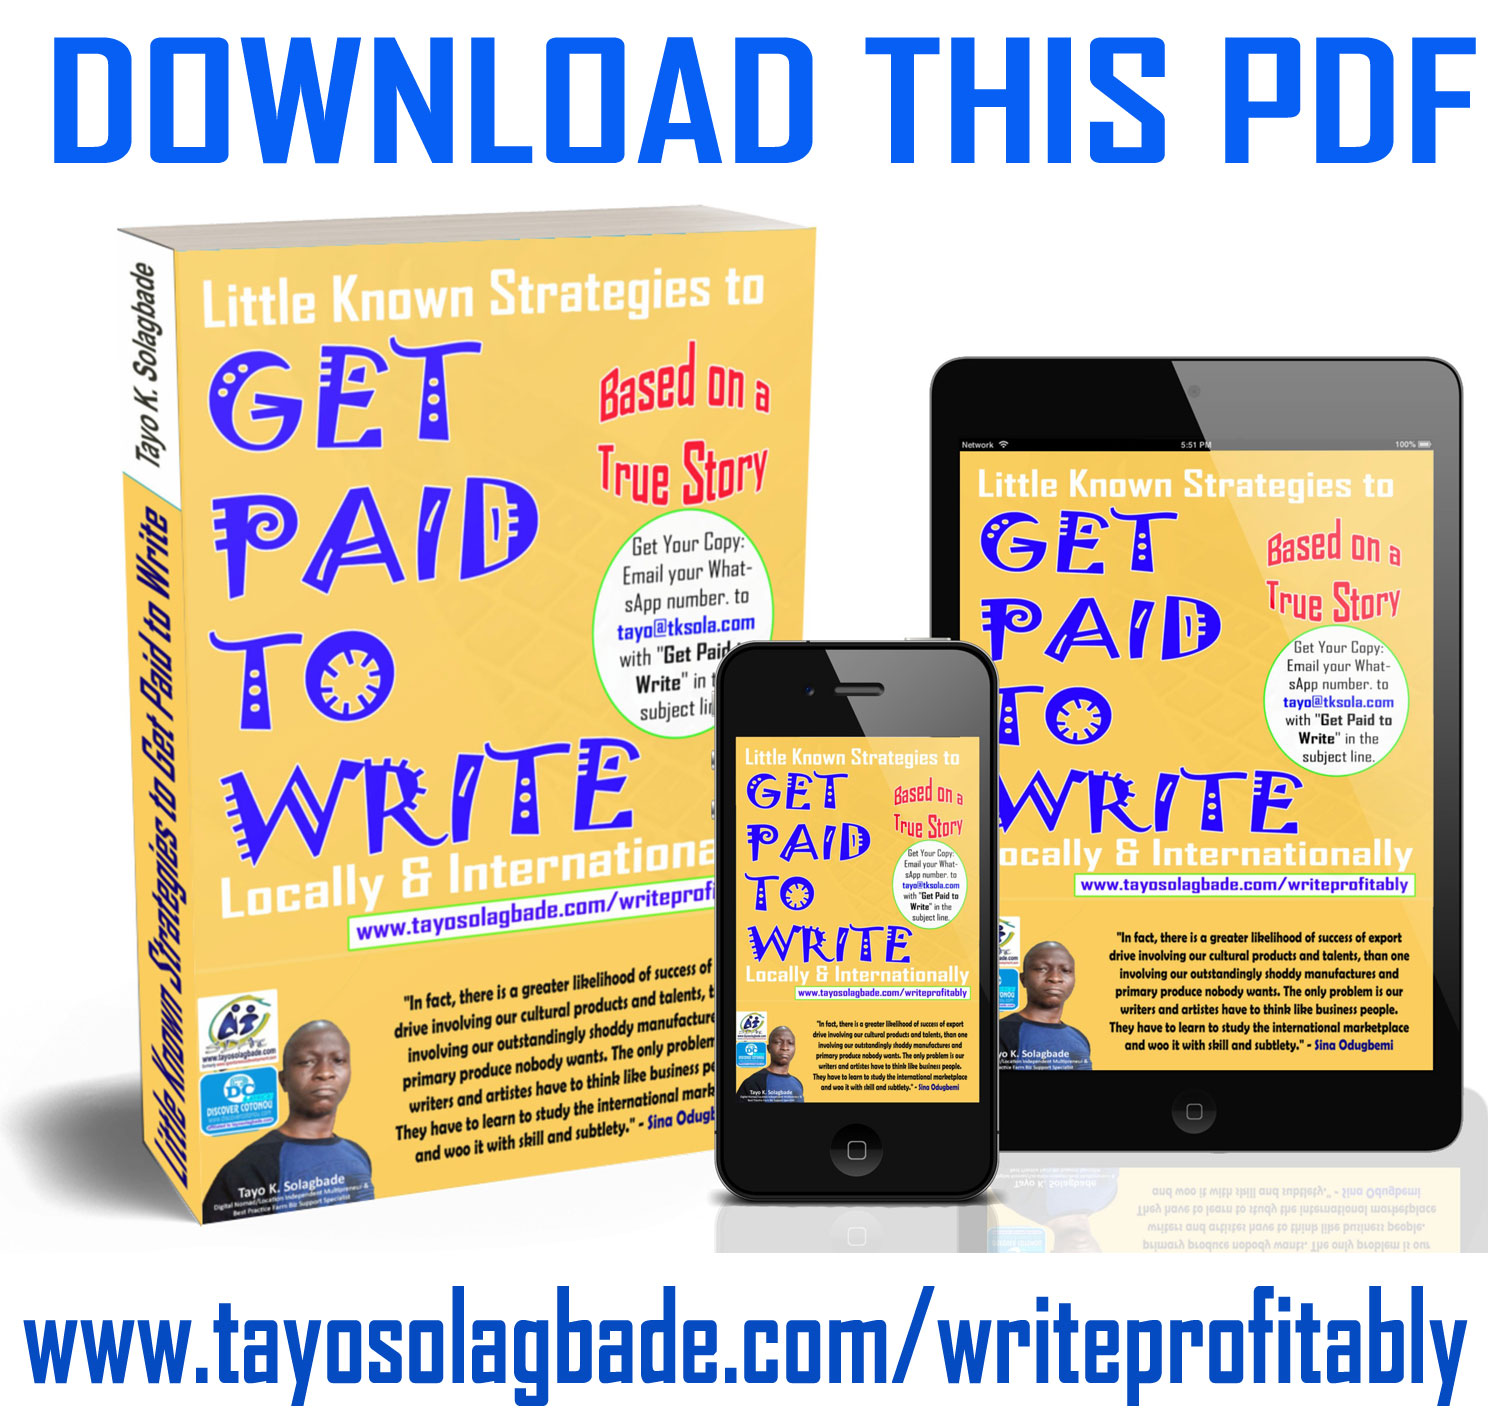 [FREE PDF] Little Known Strategies to Get Paid to Write LOCALLY & internationally (Even If You Don't Write Your Own Book!) - My True Story 